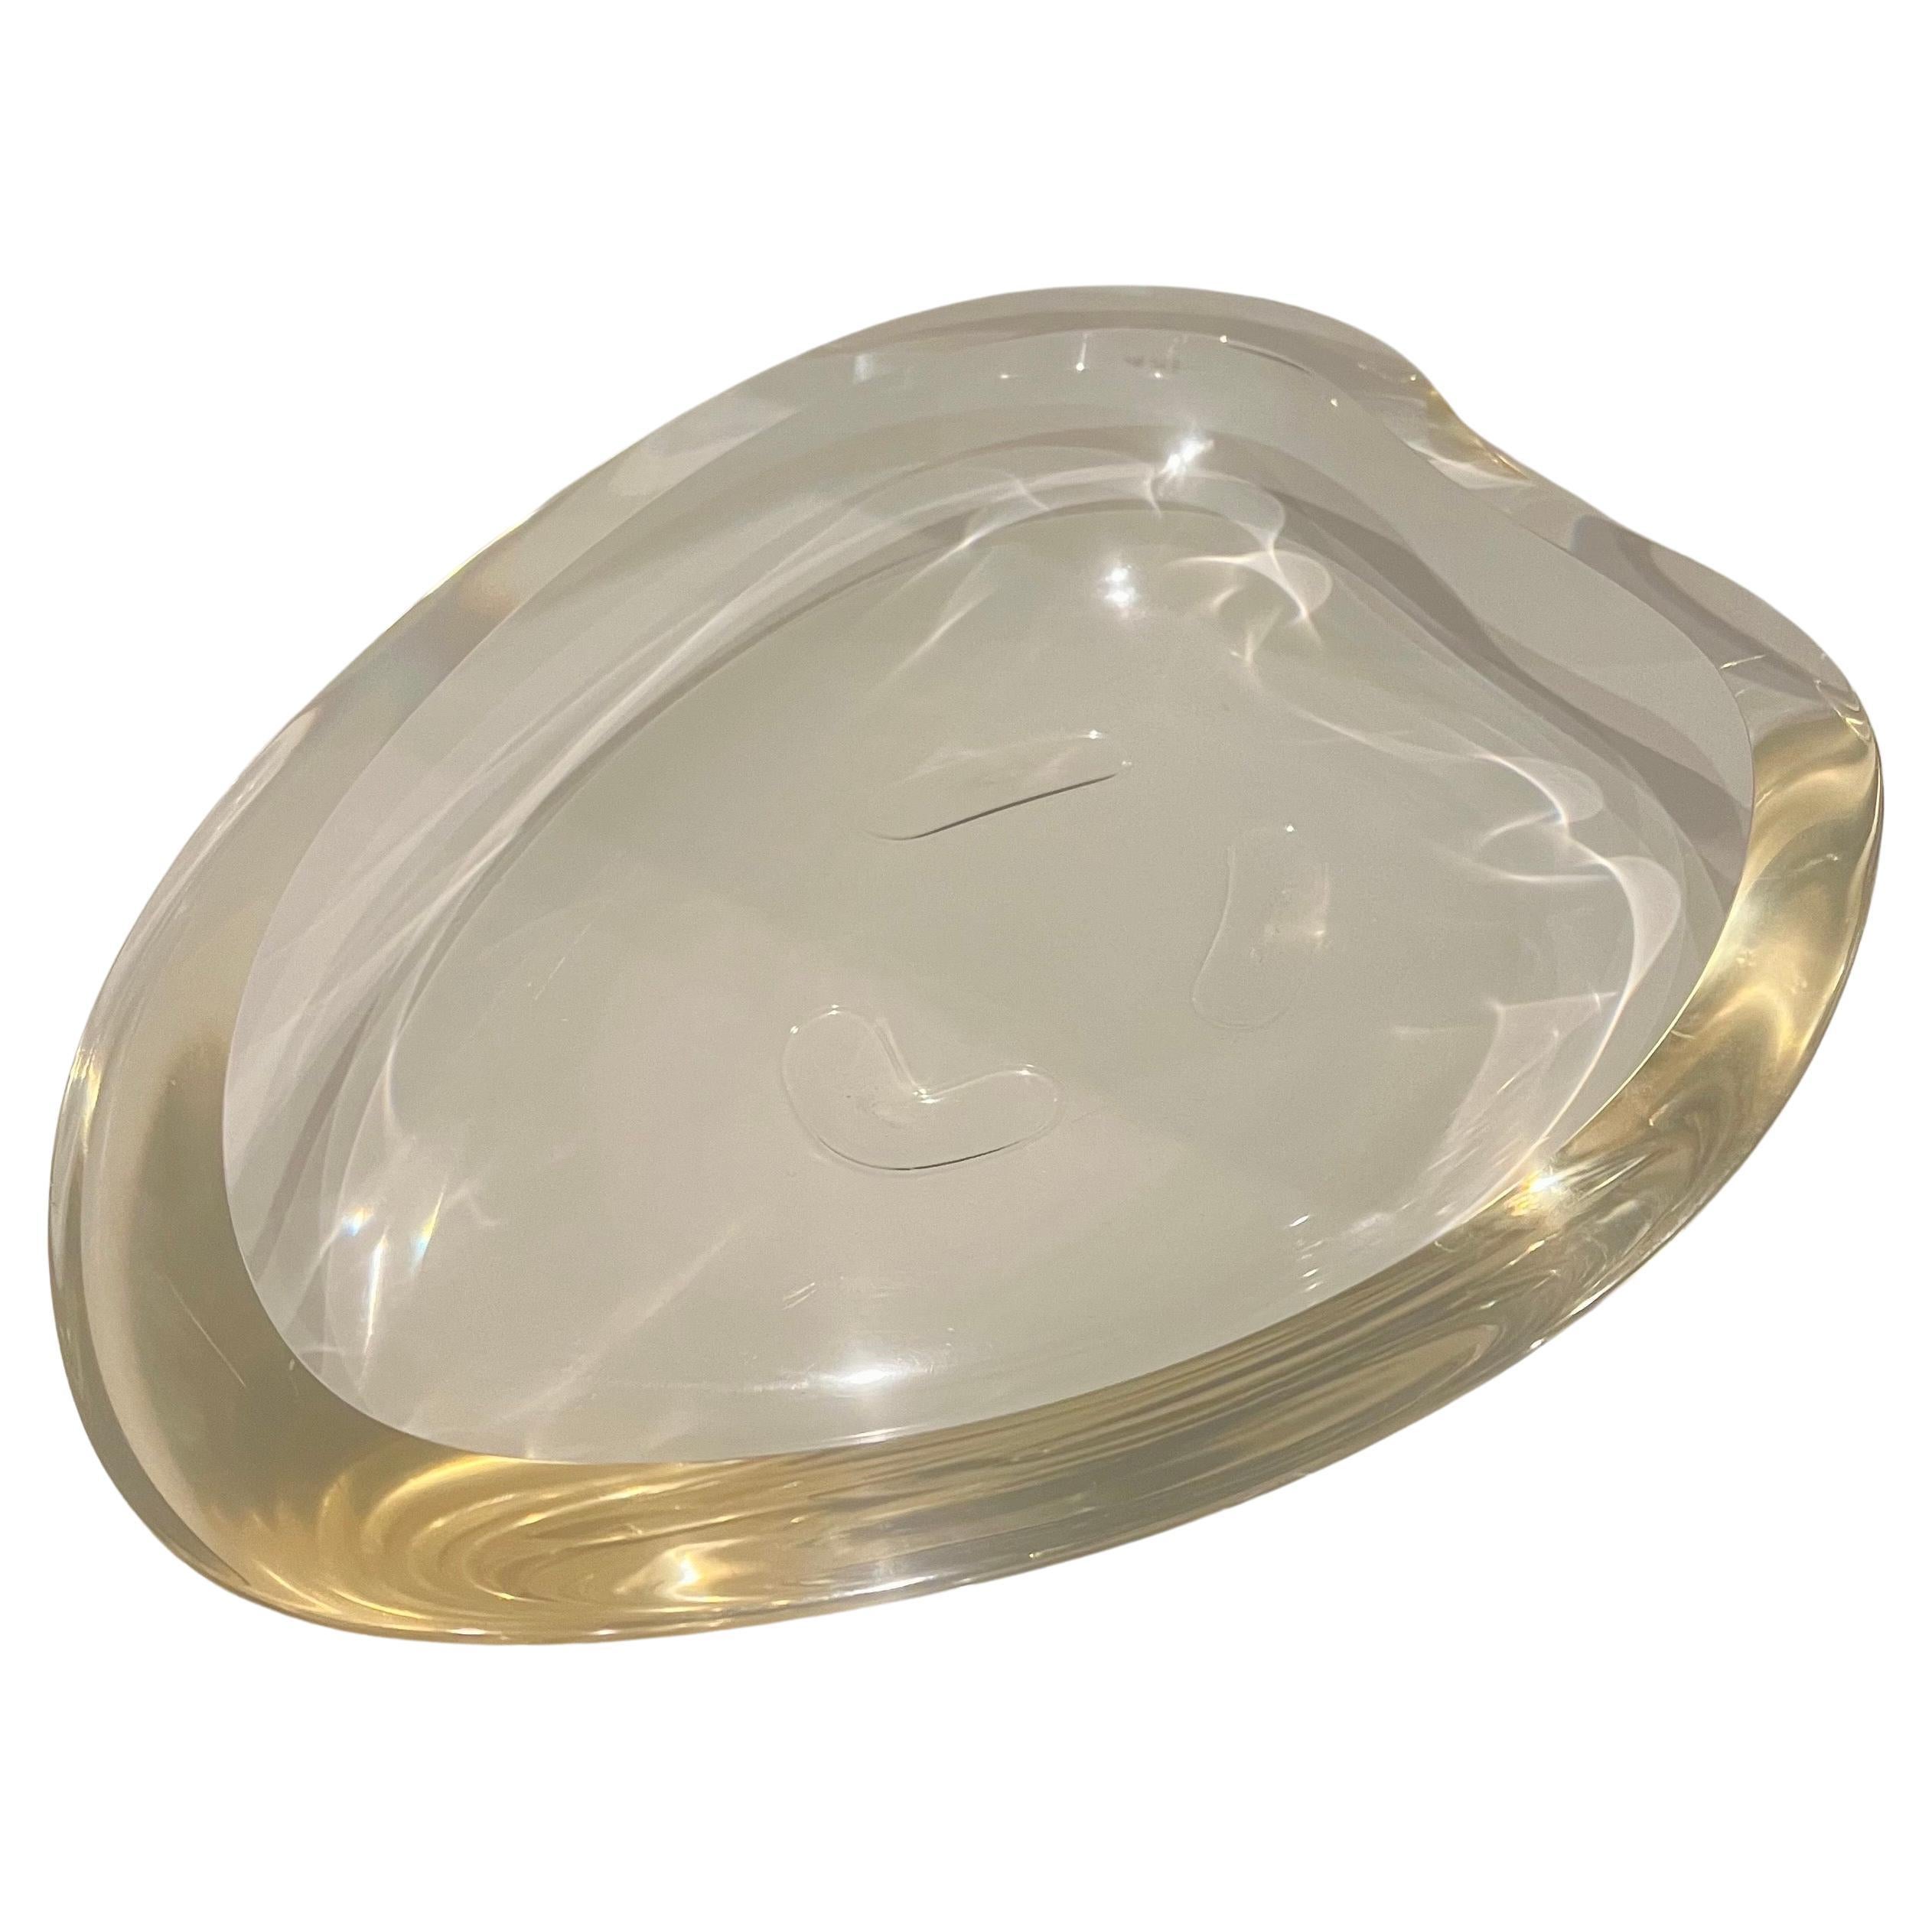 Pristine Mid-Century Large Biomorphic Lucite Bowl Attributed To Ritts For Sale